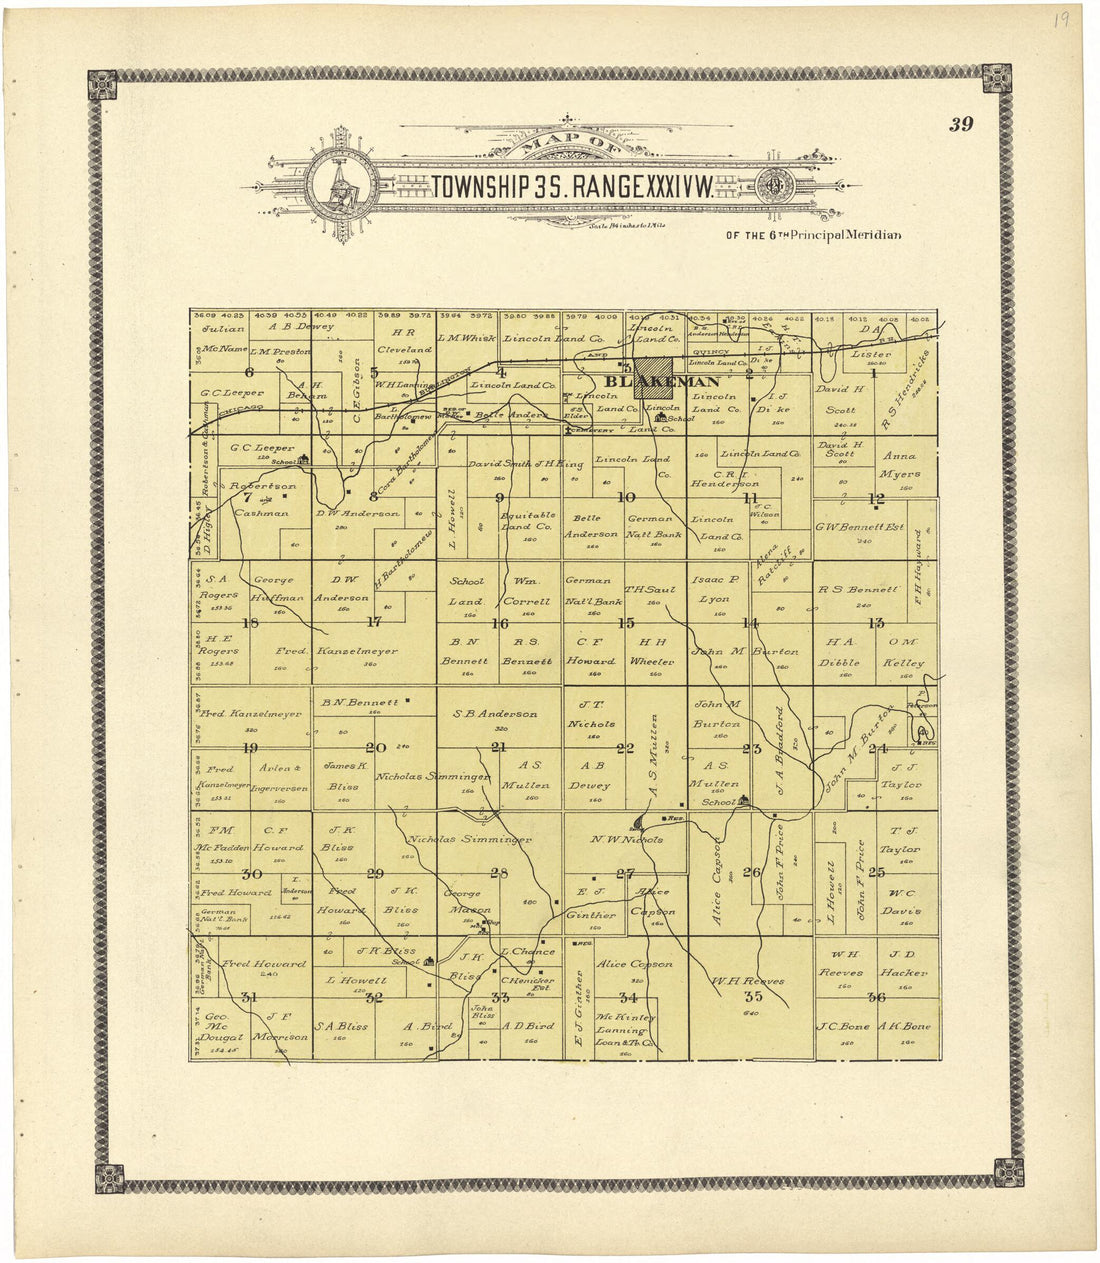 This old map of Map of Township 3 S. Range XXXIV W. from Standard Atlas of Rawlins County, Kansas from 1906 was created by  Geo. A. Ogle &amp; Co in 1906